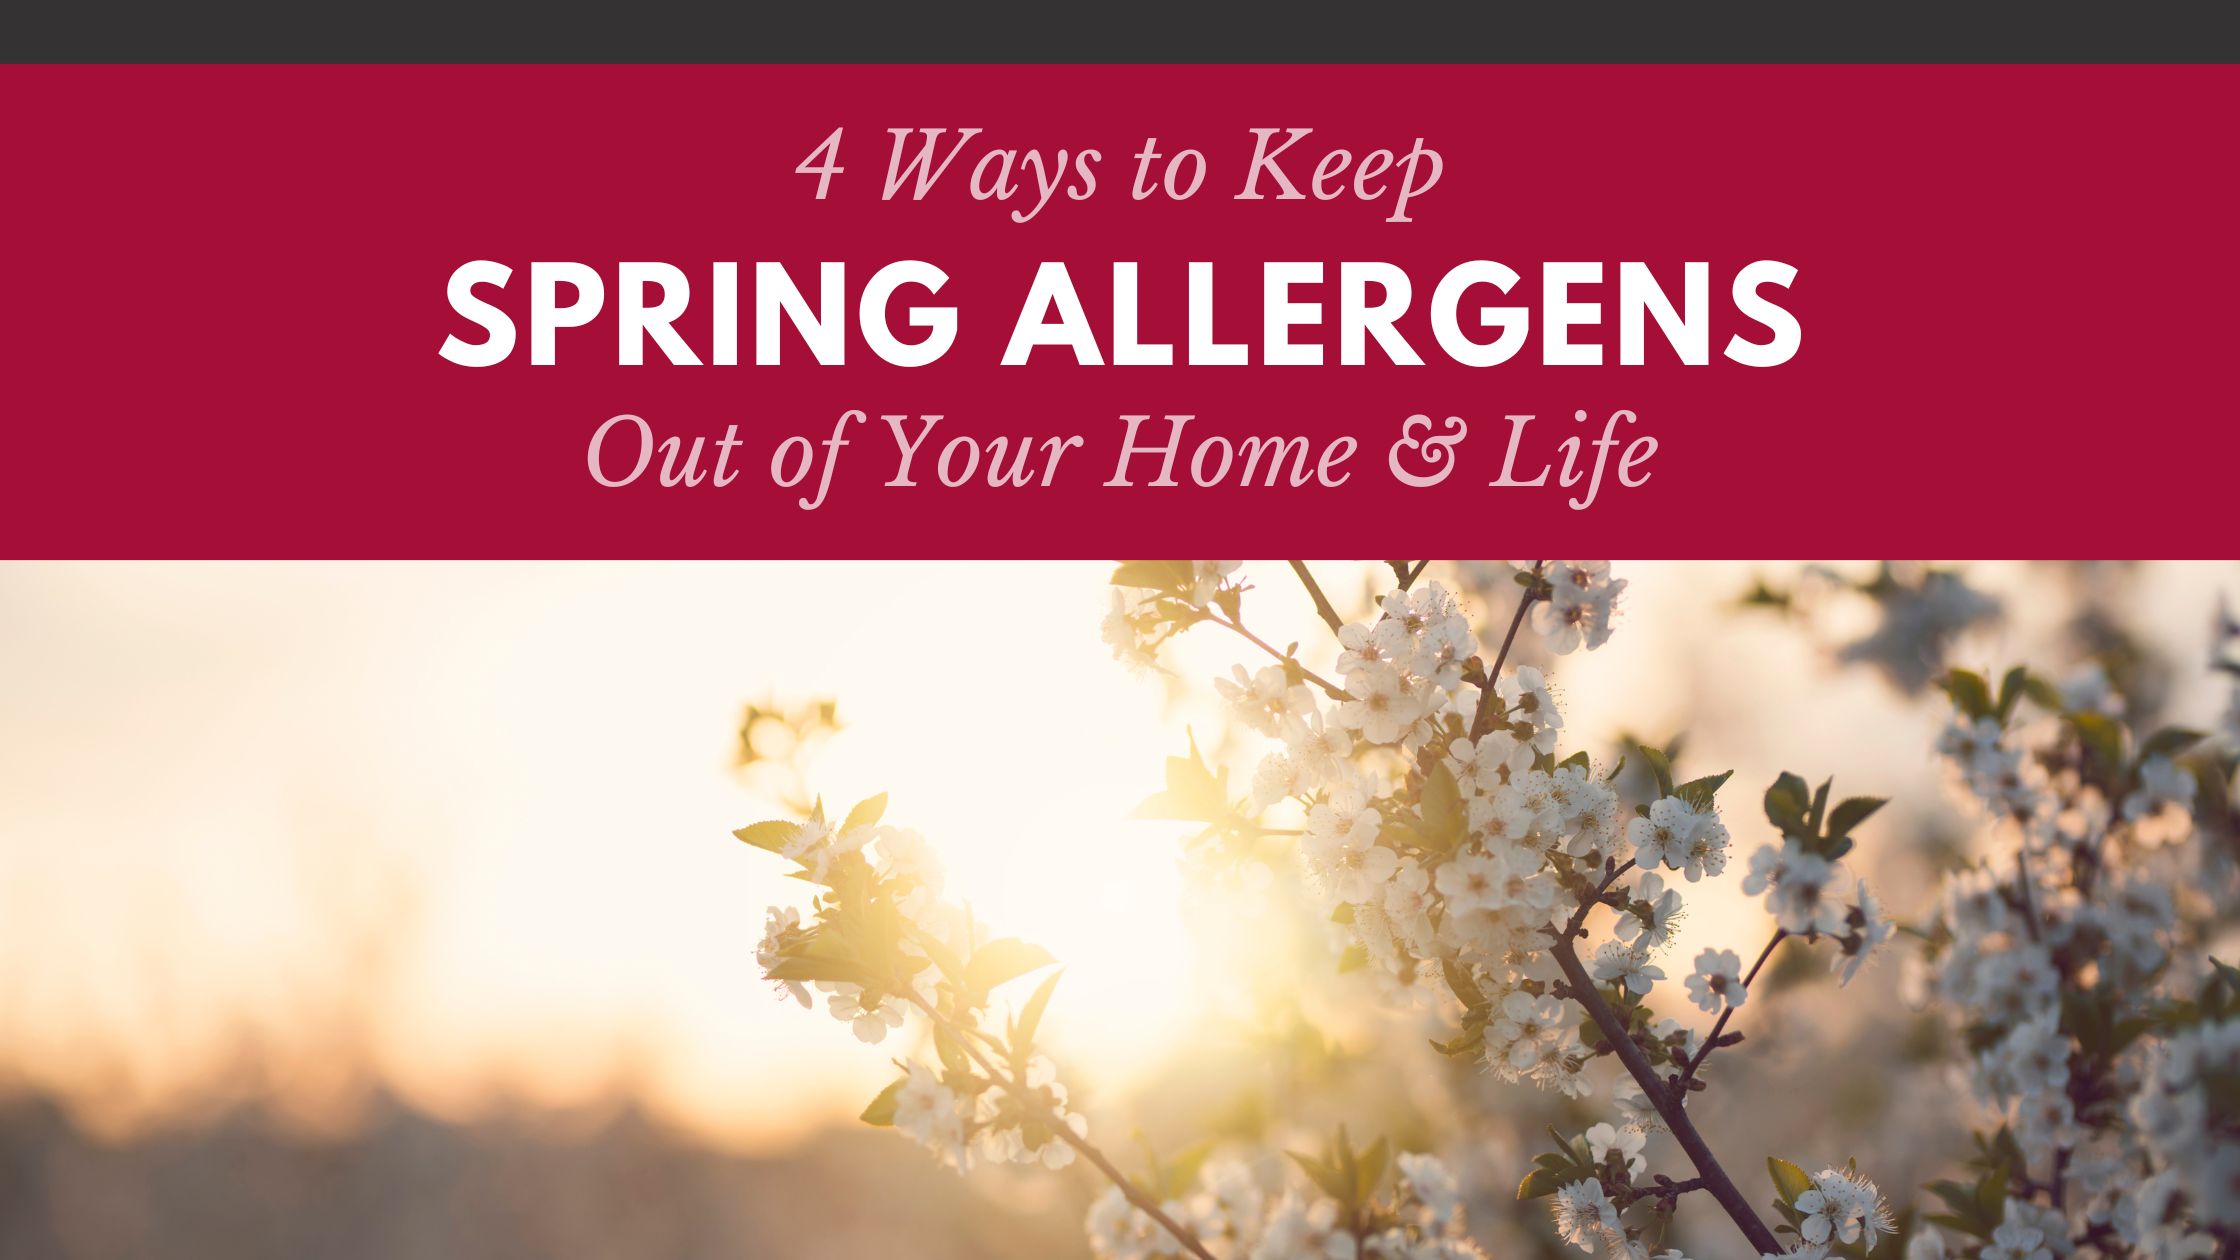 4 Ways to Keep Spring Allergens Out of Your Home & Life